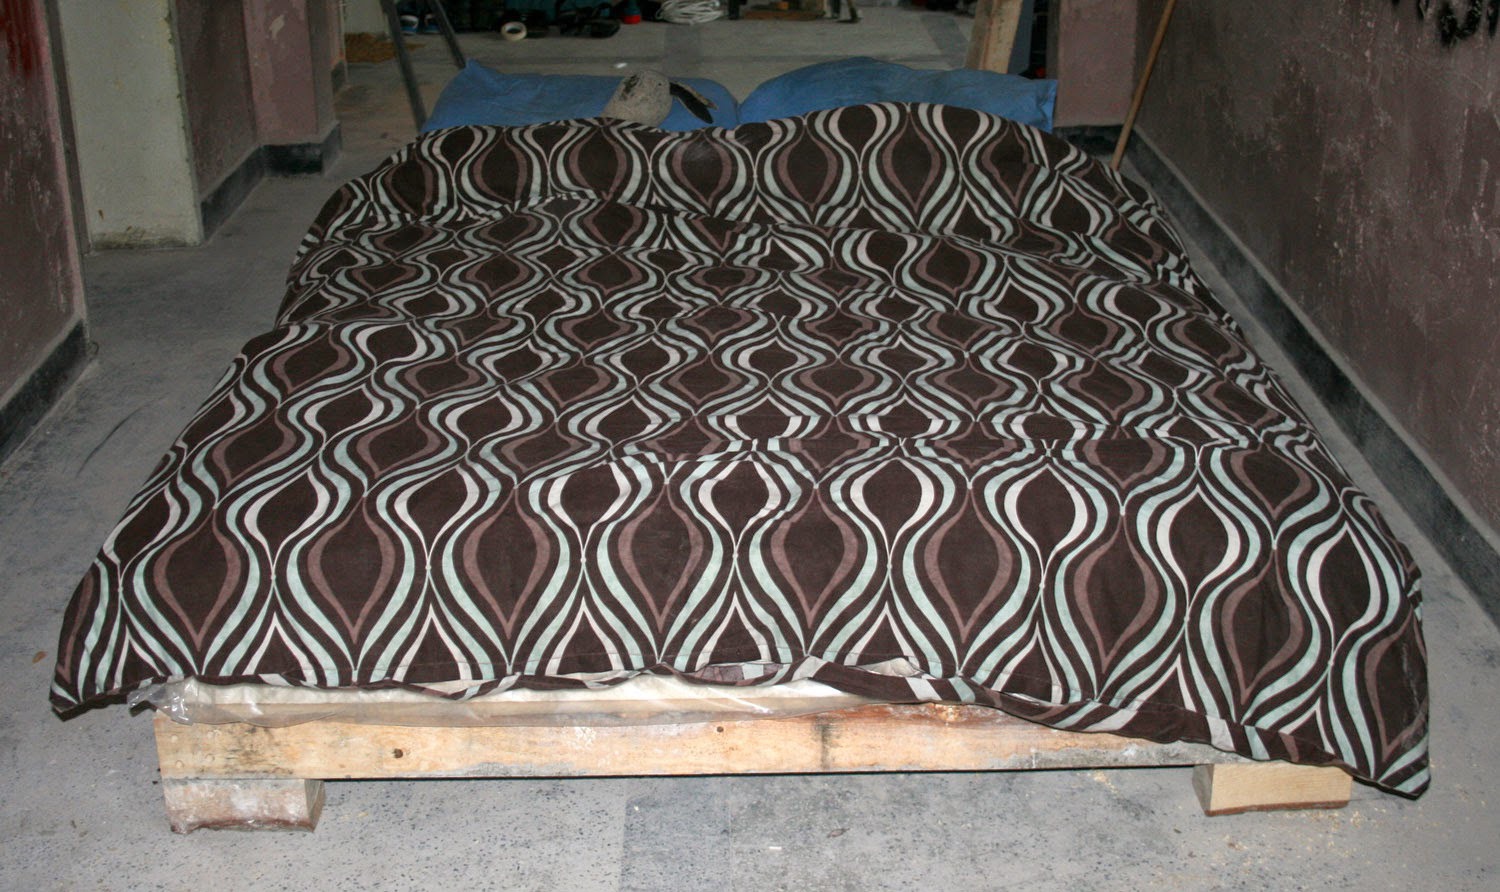 12-The-finished-bed